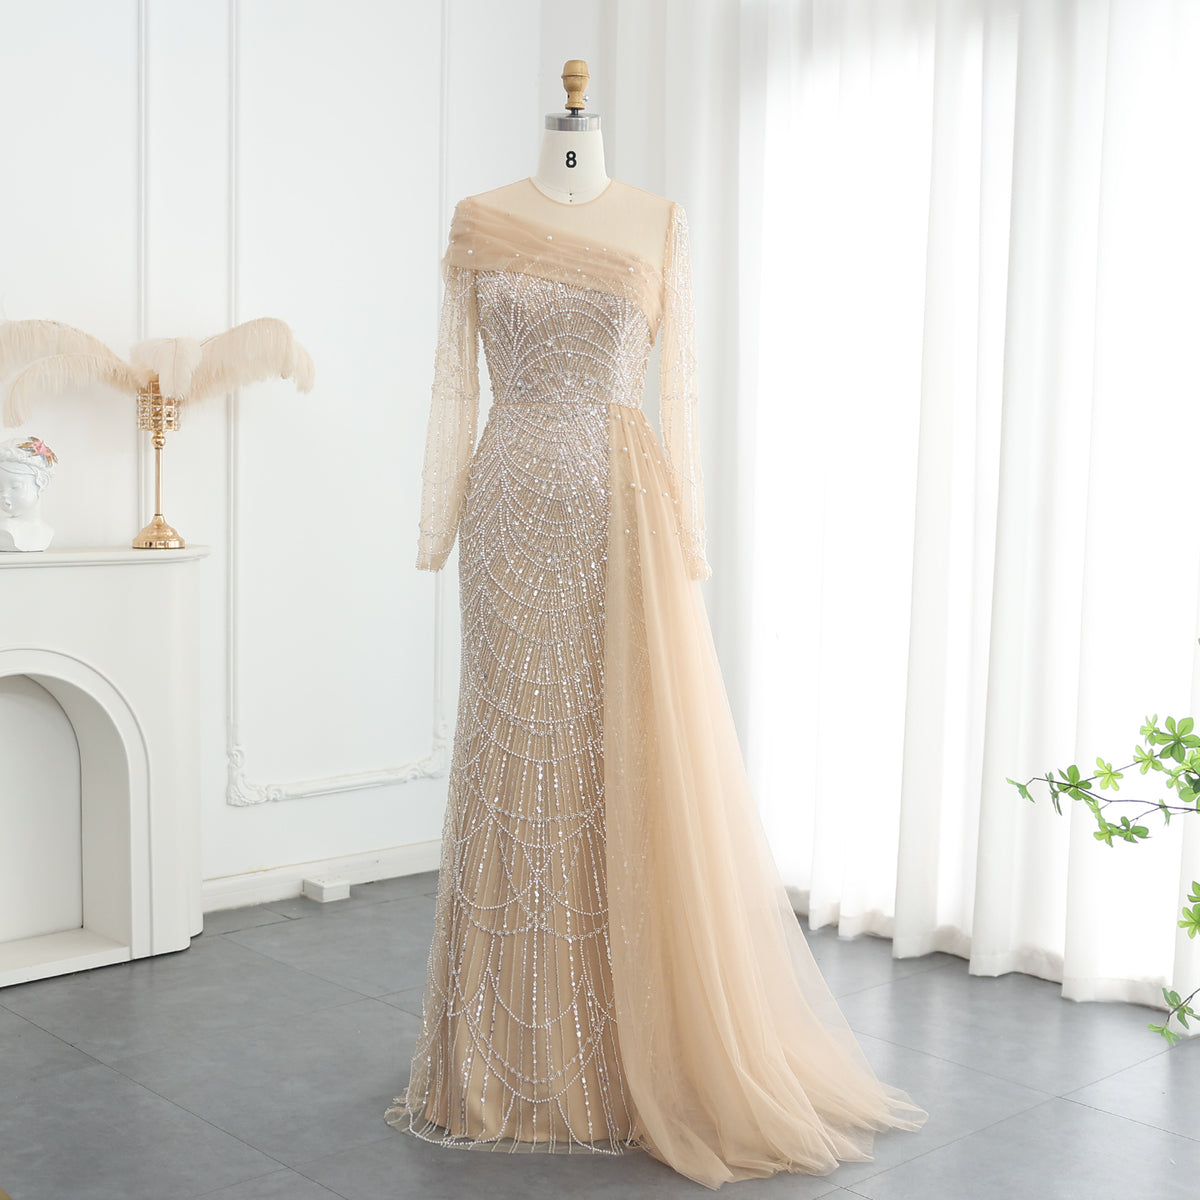 Sharon Said Luxury Beaded Champagne Mermaid Long Sleeves Arabic Evening Dress for Women Wedding Formal Party Gowns SS259